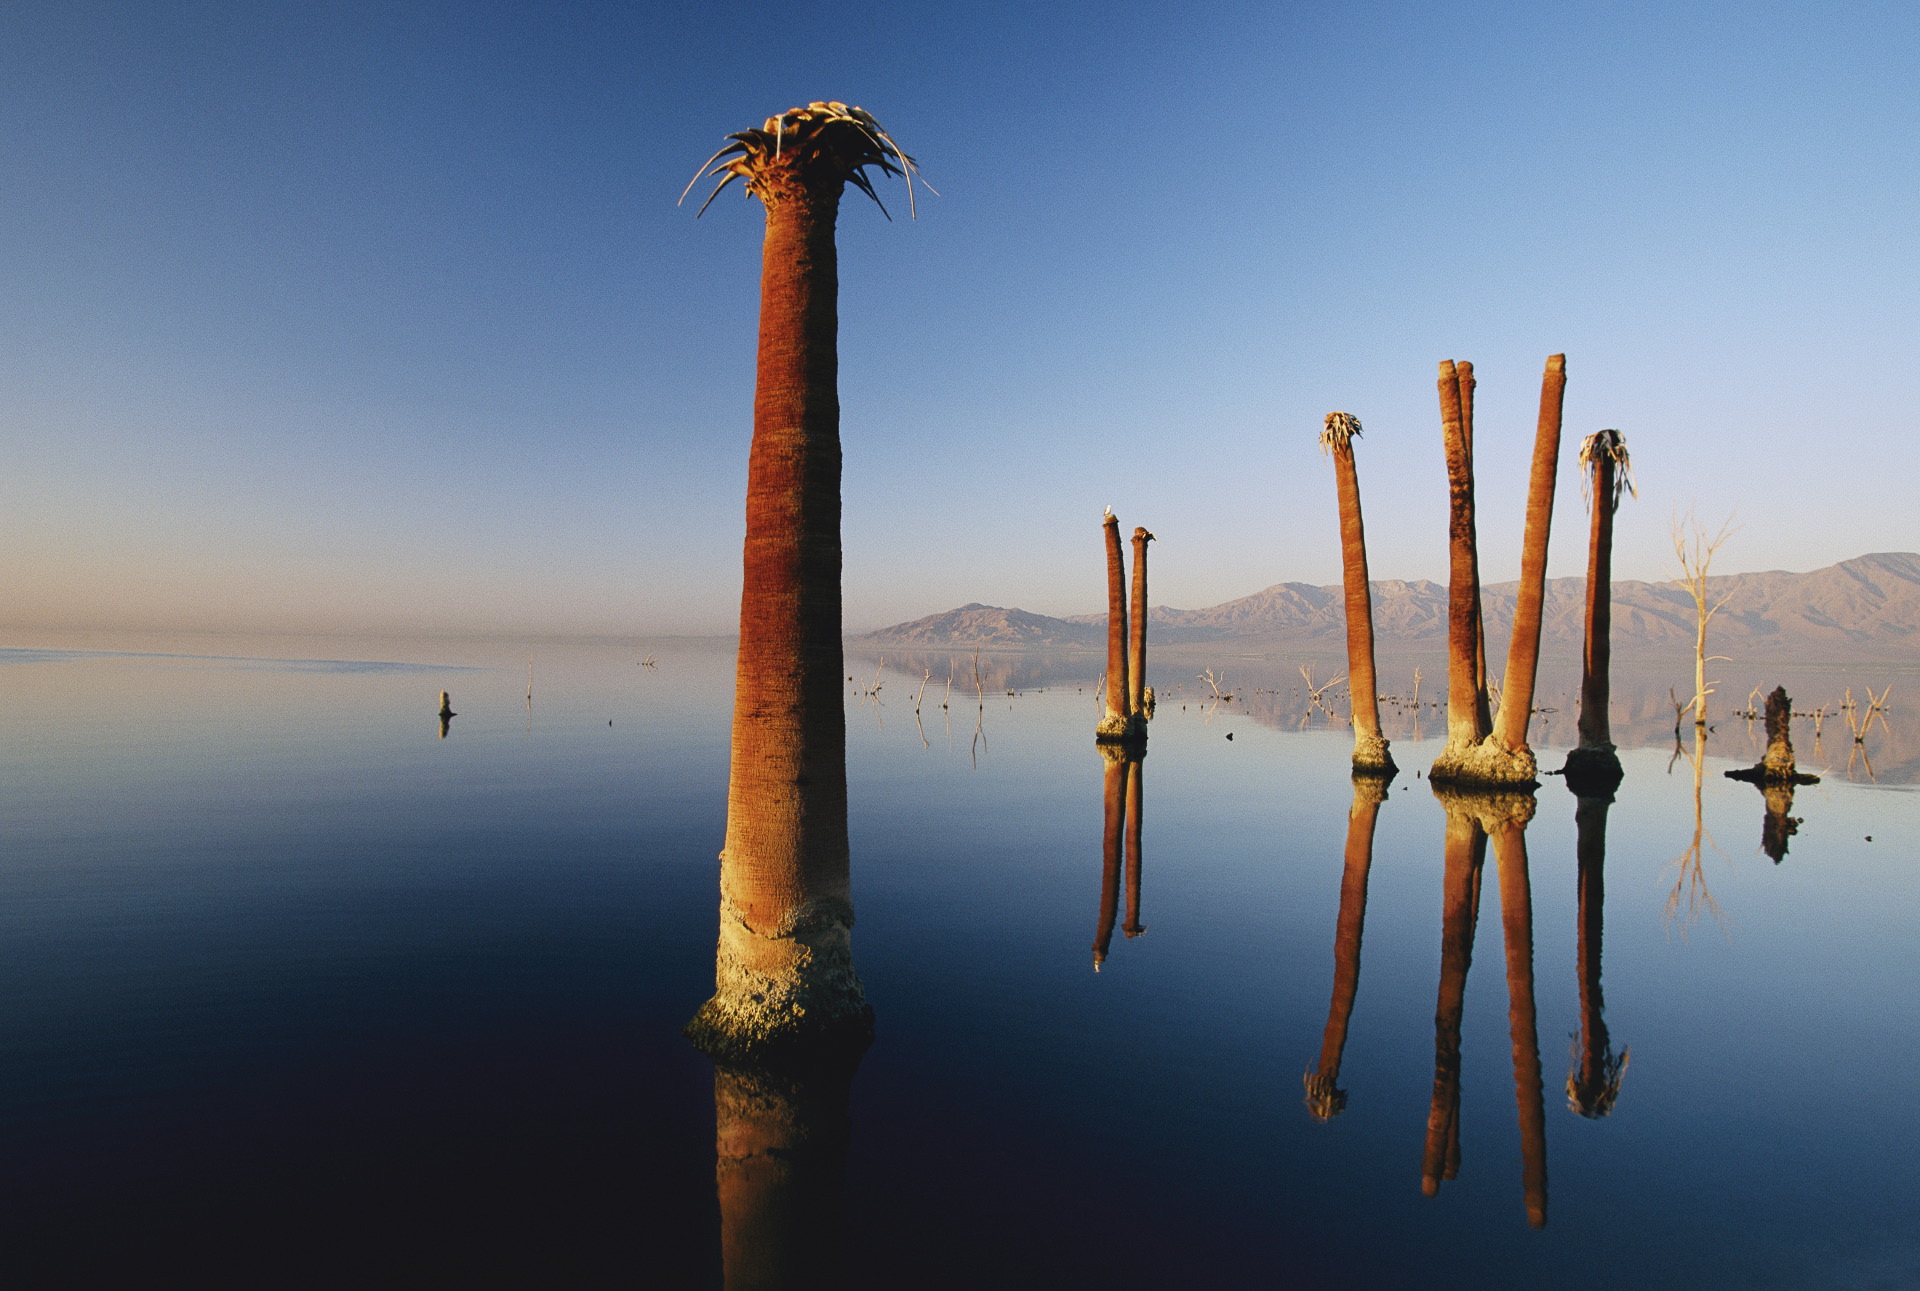  Sunken palm trees suggest that the Salton Sea has seen better days. A fluctuation in sea level and increased salinity have since led to near catastrophic environmental decay.  Near Mecca  